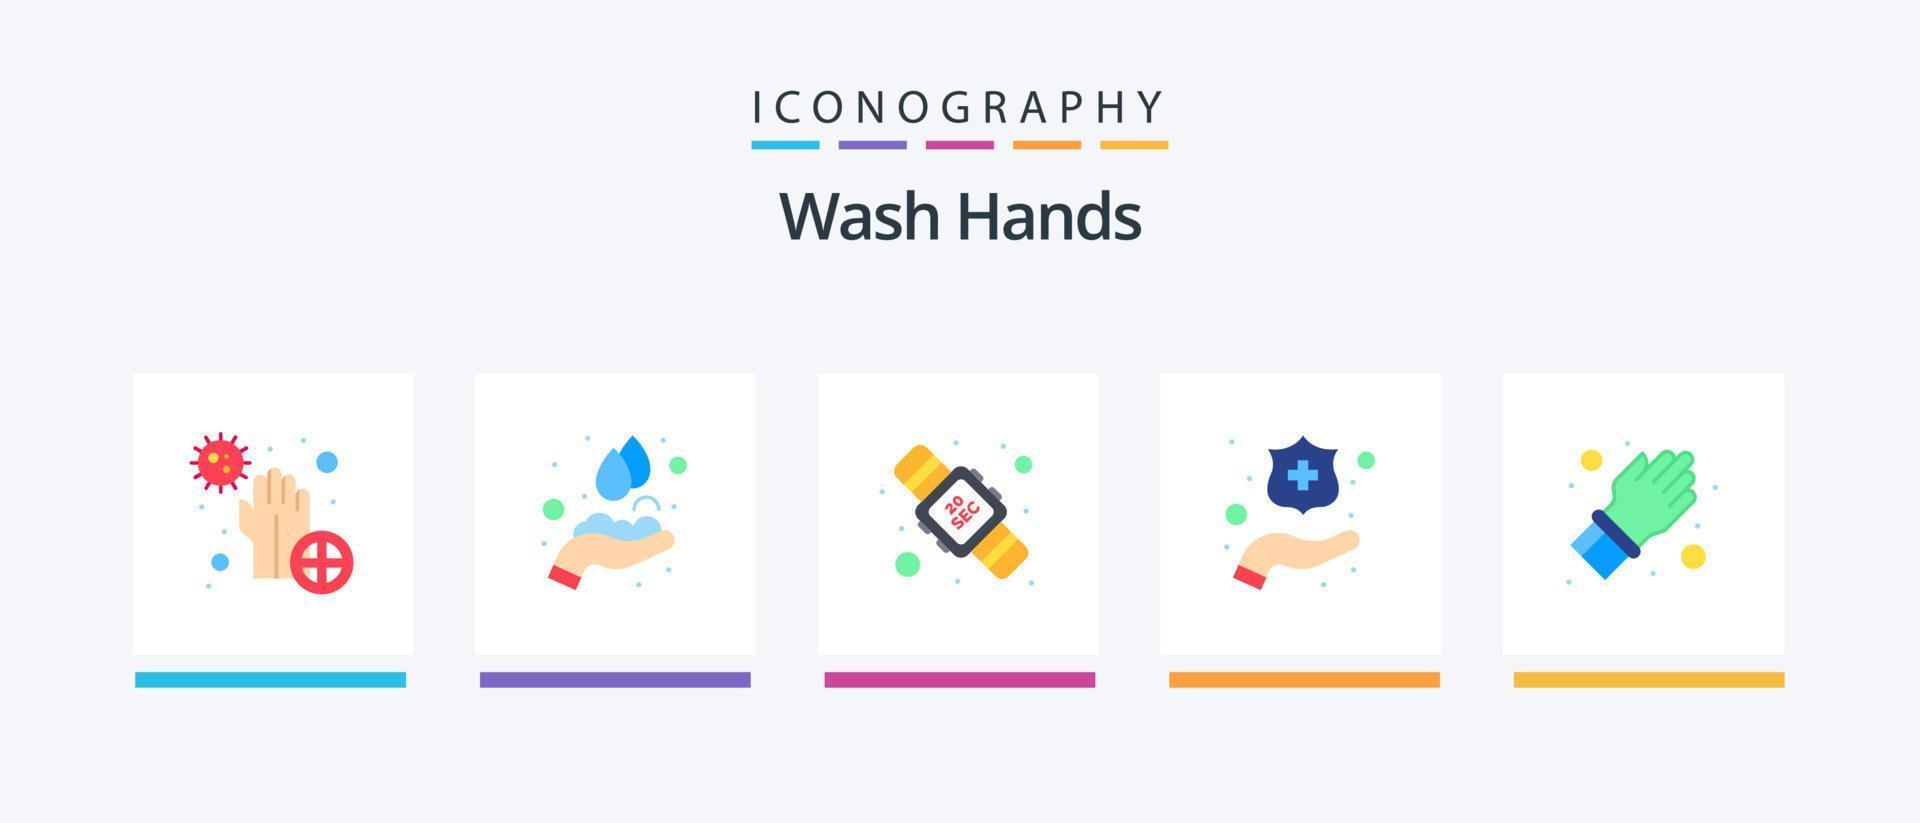 Wash Hands Flat 5 Icon Pack Including hand. washing. washing. hands. washing. Creative Icons Design vector